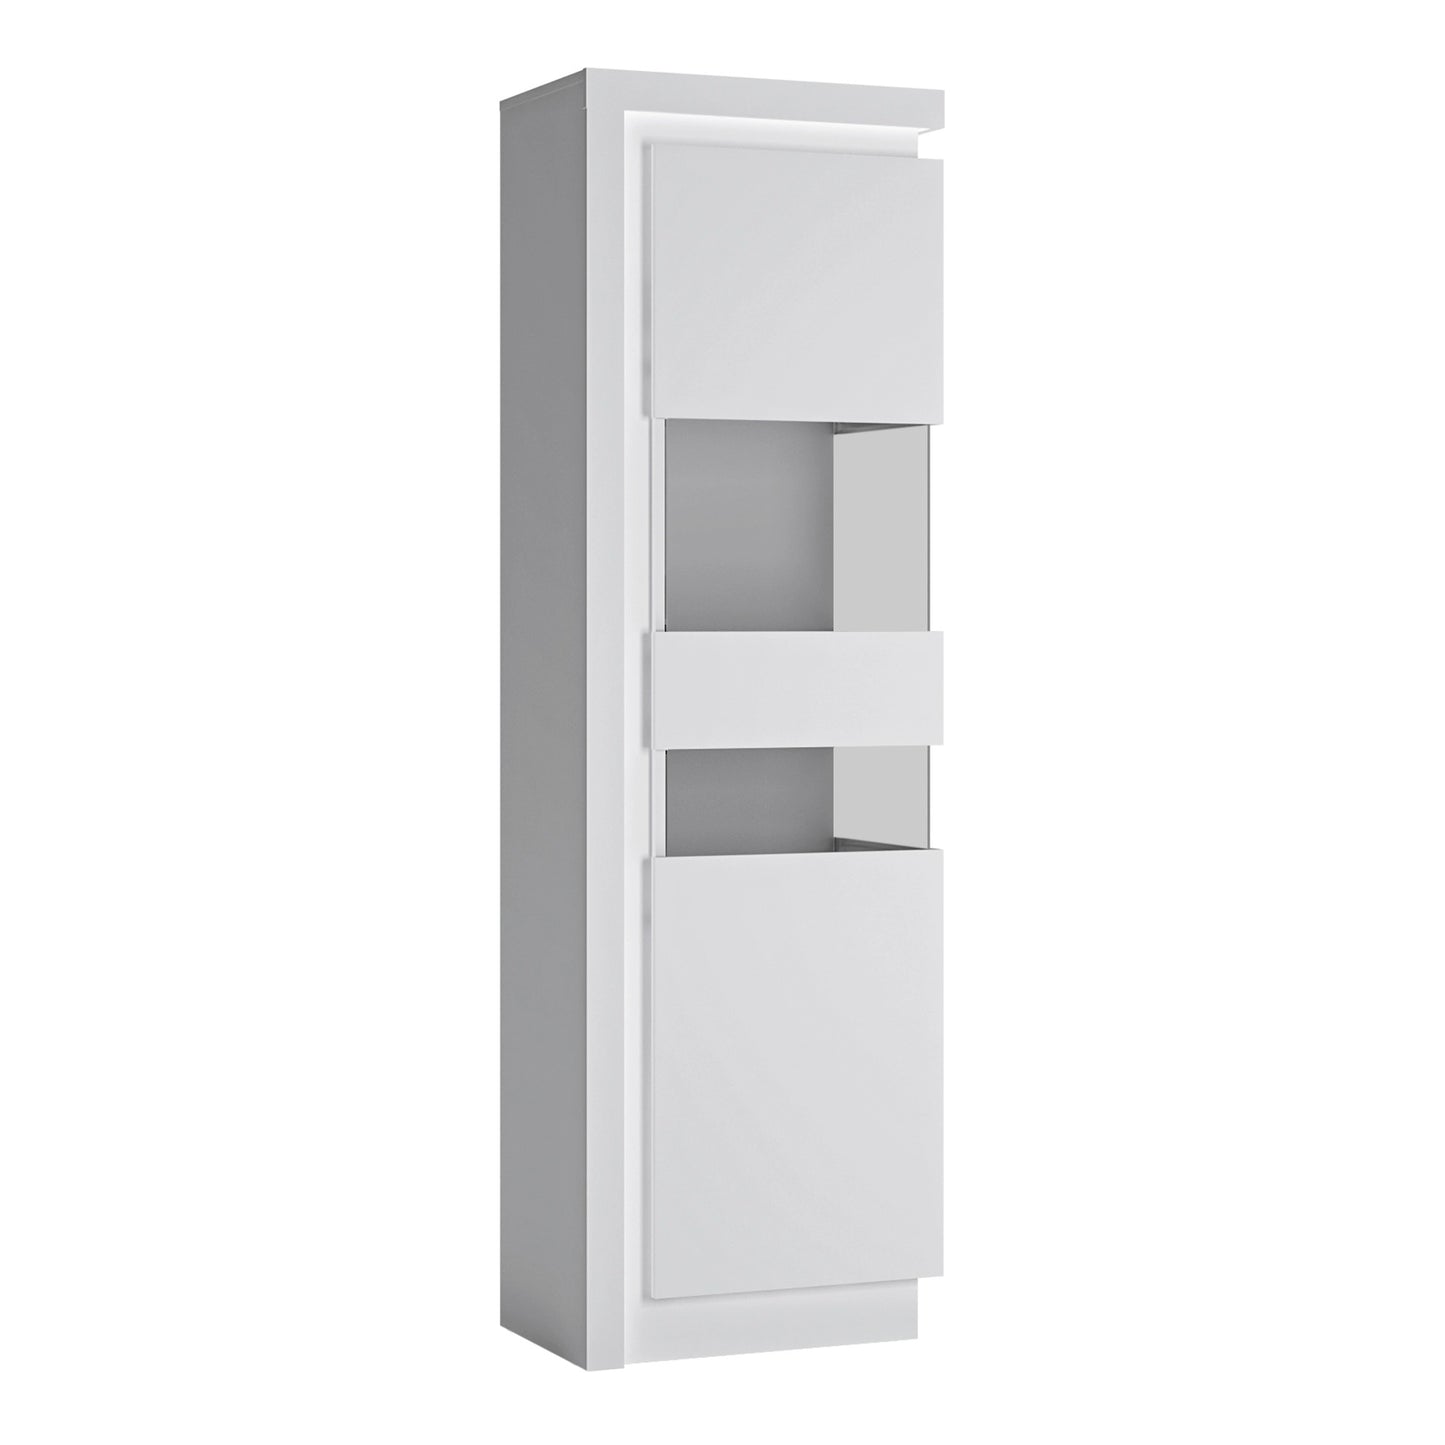 Furniture To Go Lyon Tall Narrow Display Cabinet (RHD) (Including Led Lighting) in White & High Gloss